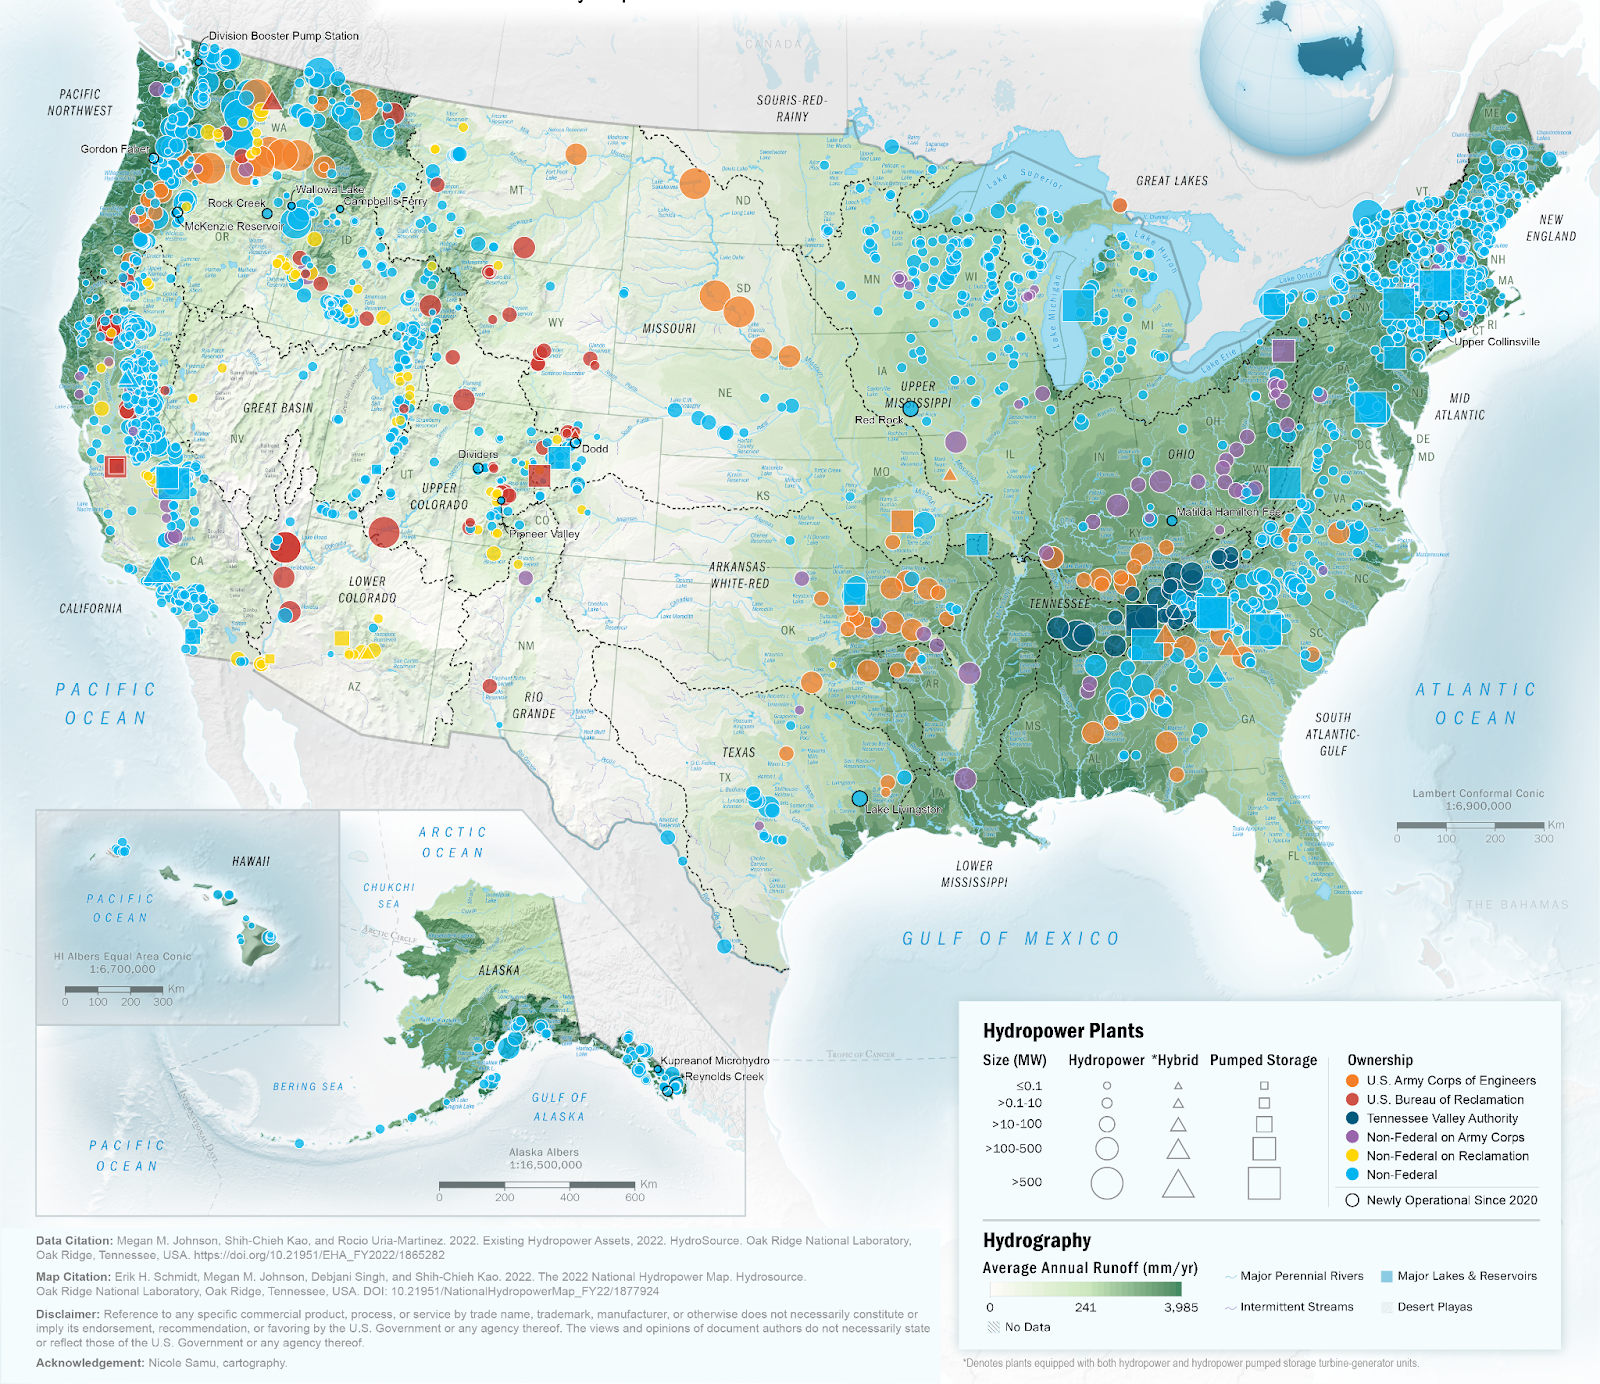 This map shows the distribution and characteristics of operational hydropower facilities in the U.S. as of 2022. Image used courtesy of Oak Ridge National Laboratory